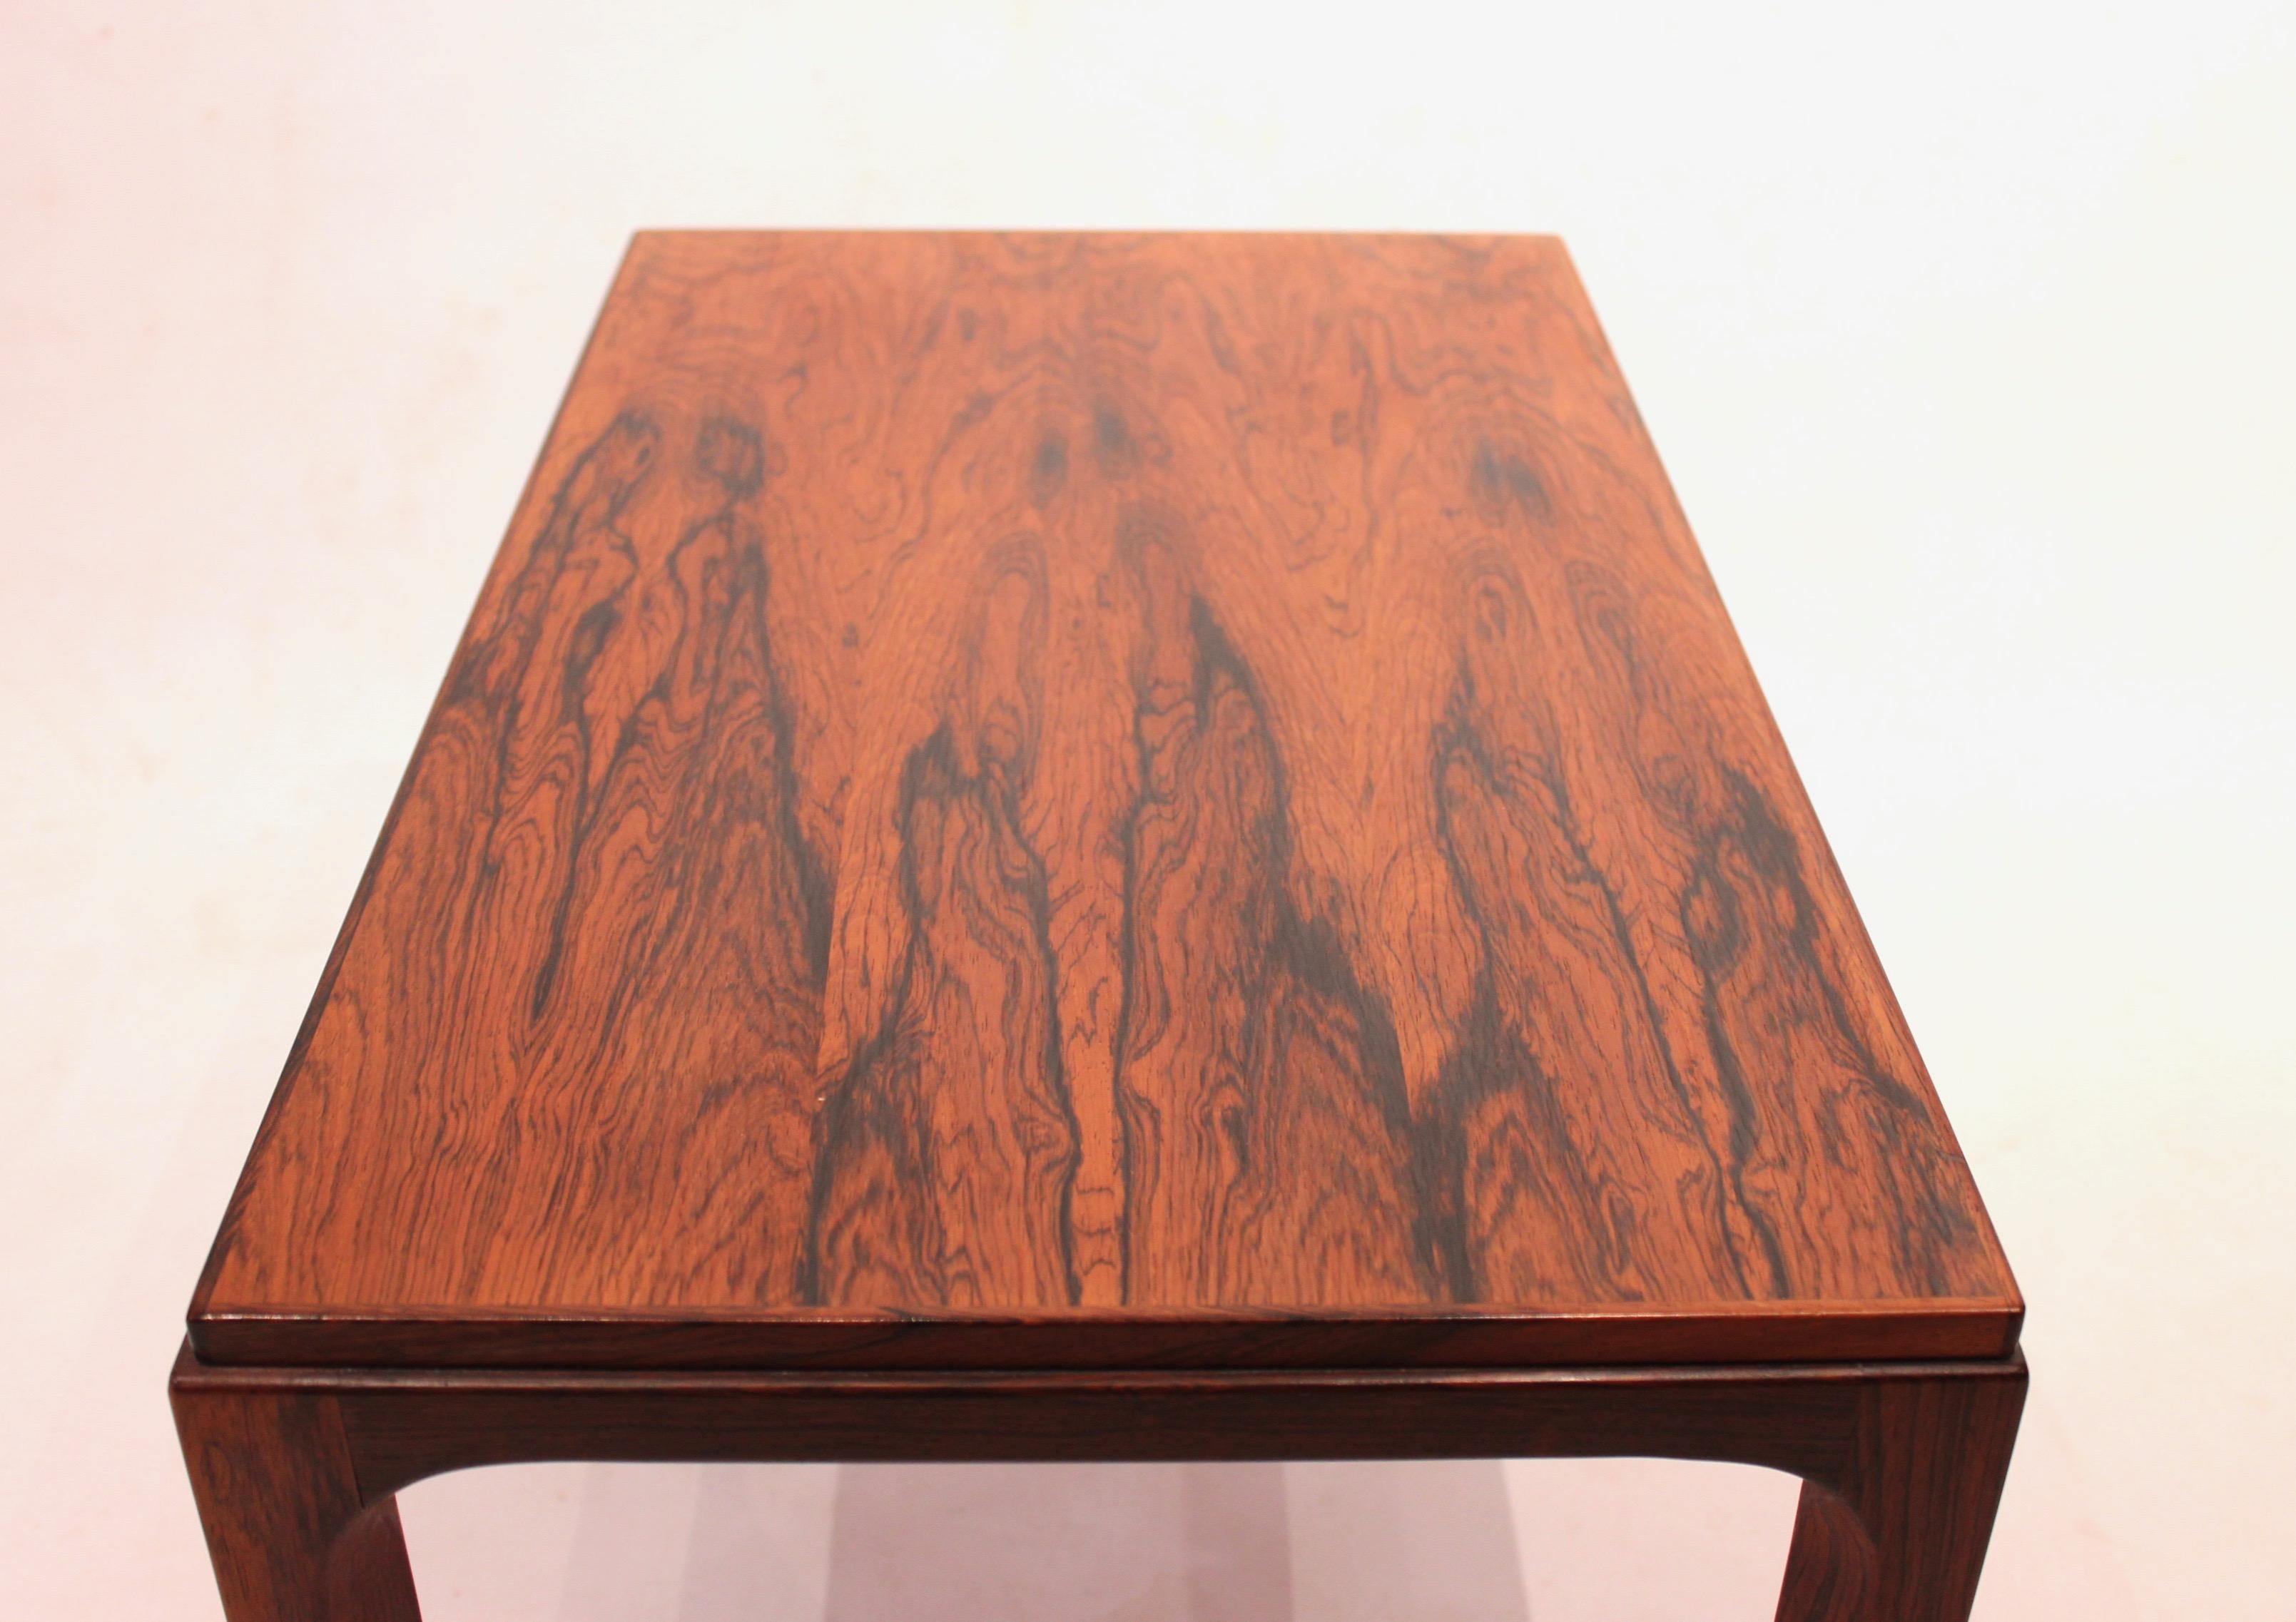 Mid-20th Century Side Table Made In Rosewood By Aksel Kjersgaard Made By Odder From 1960s For Sale